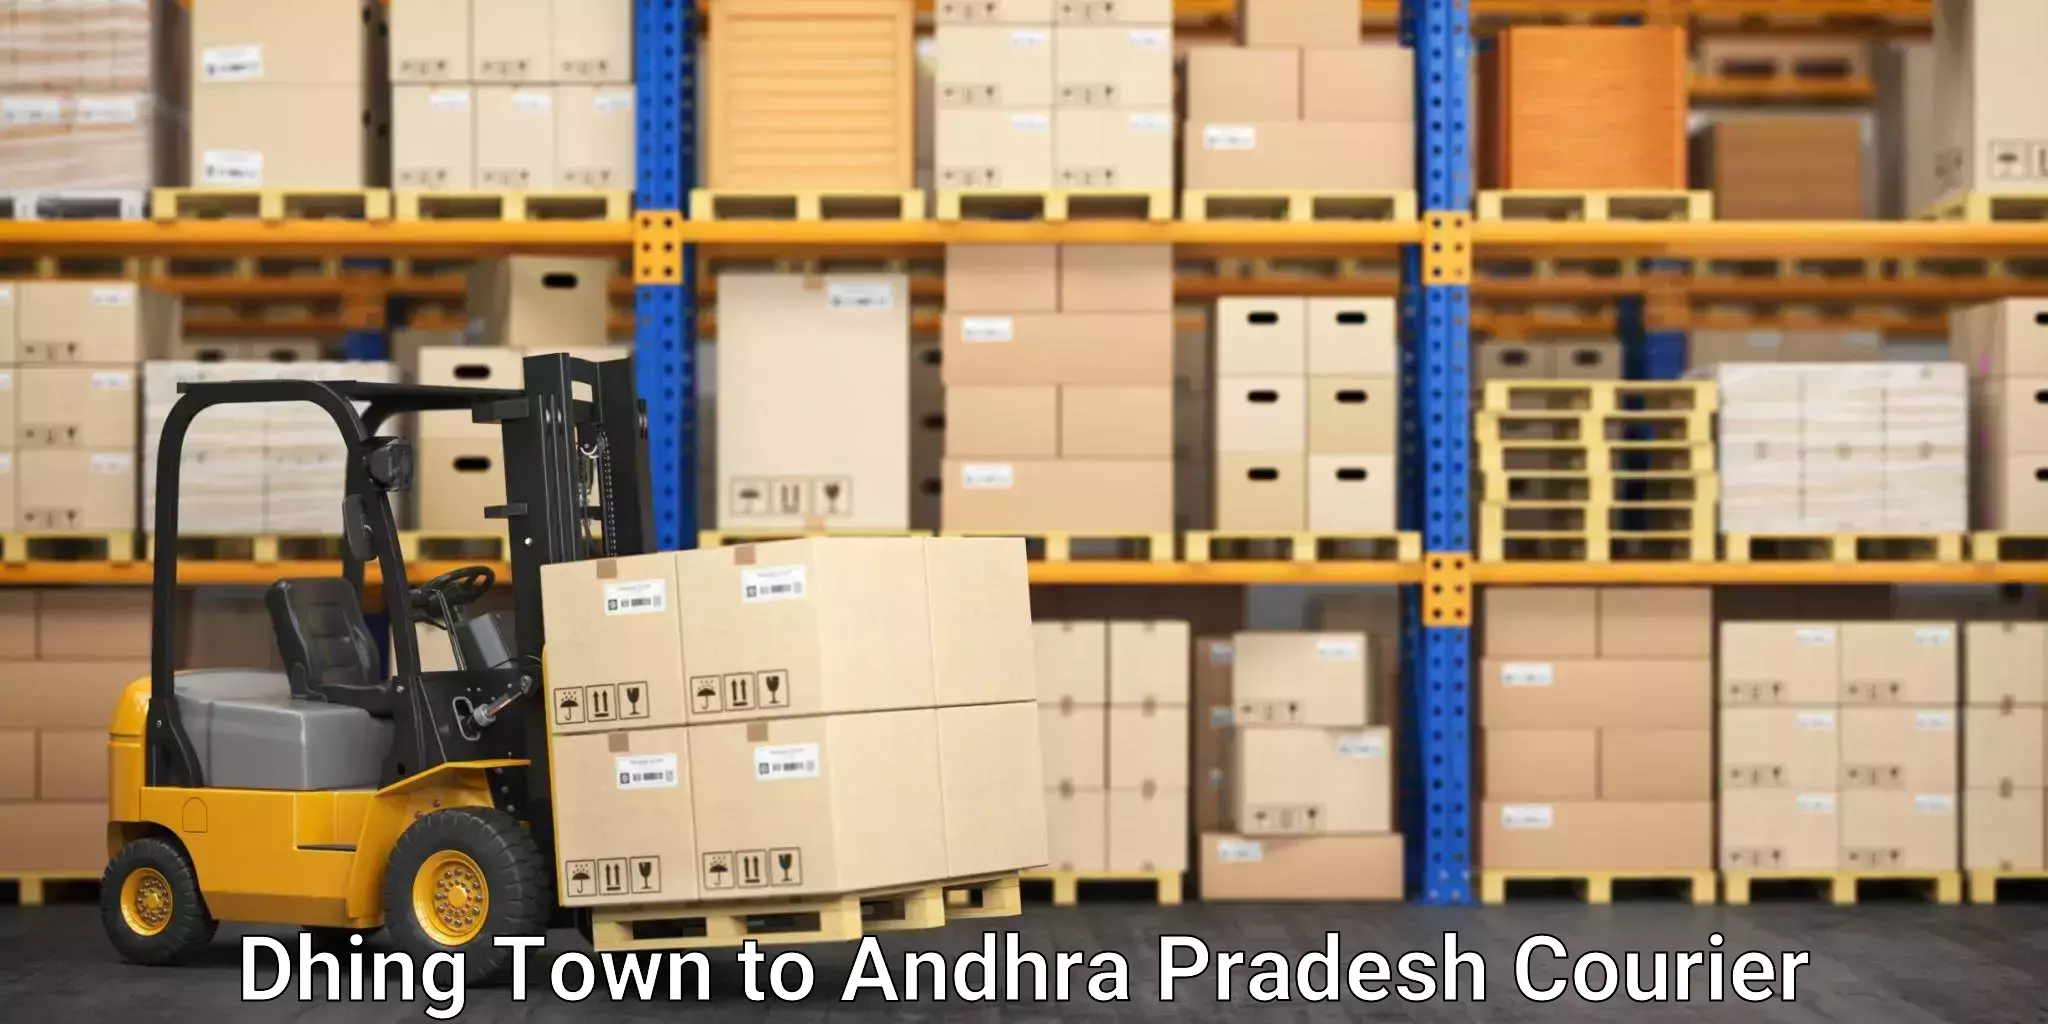 Customer-centric shipping Dhing Town to Visakhapatnam Port